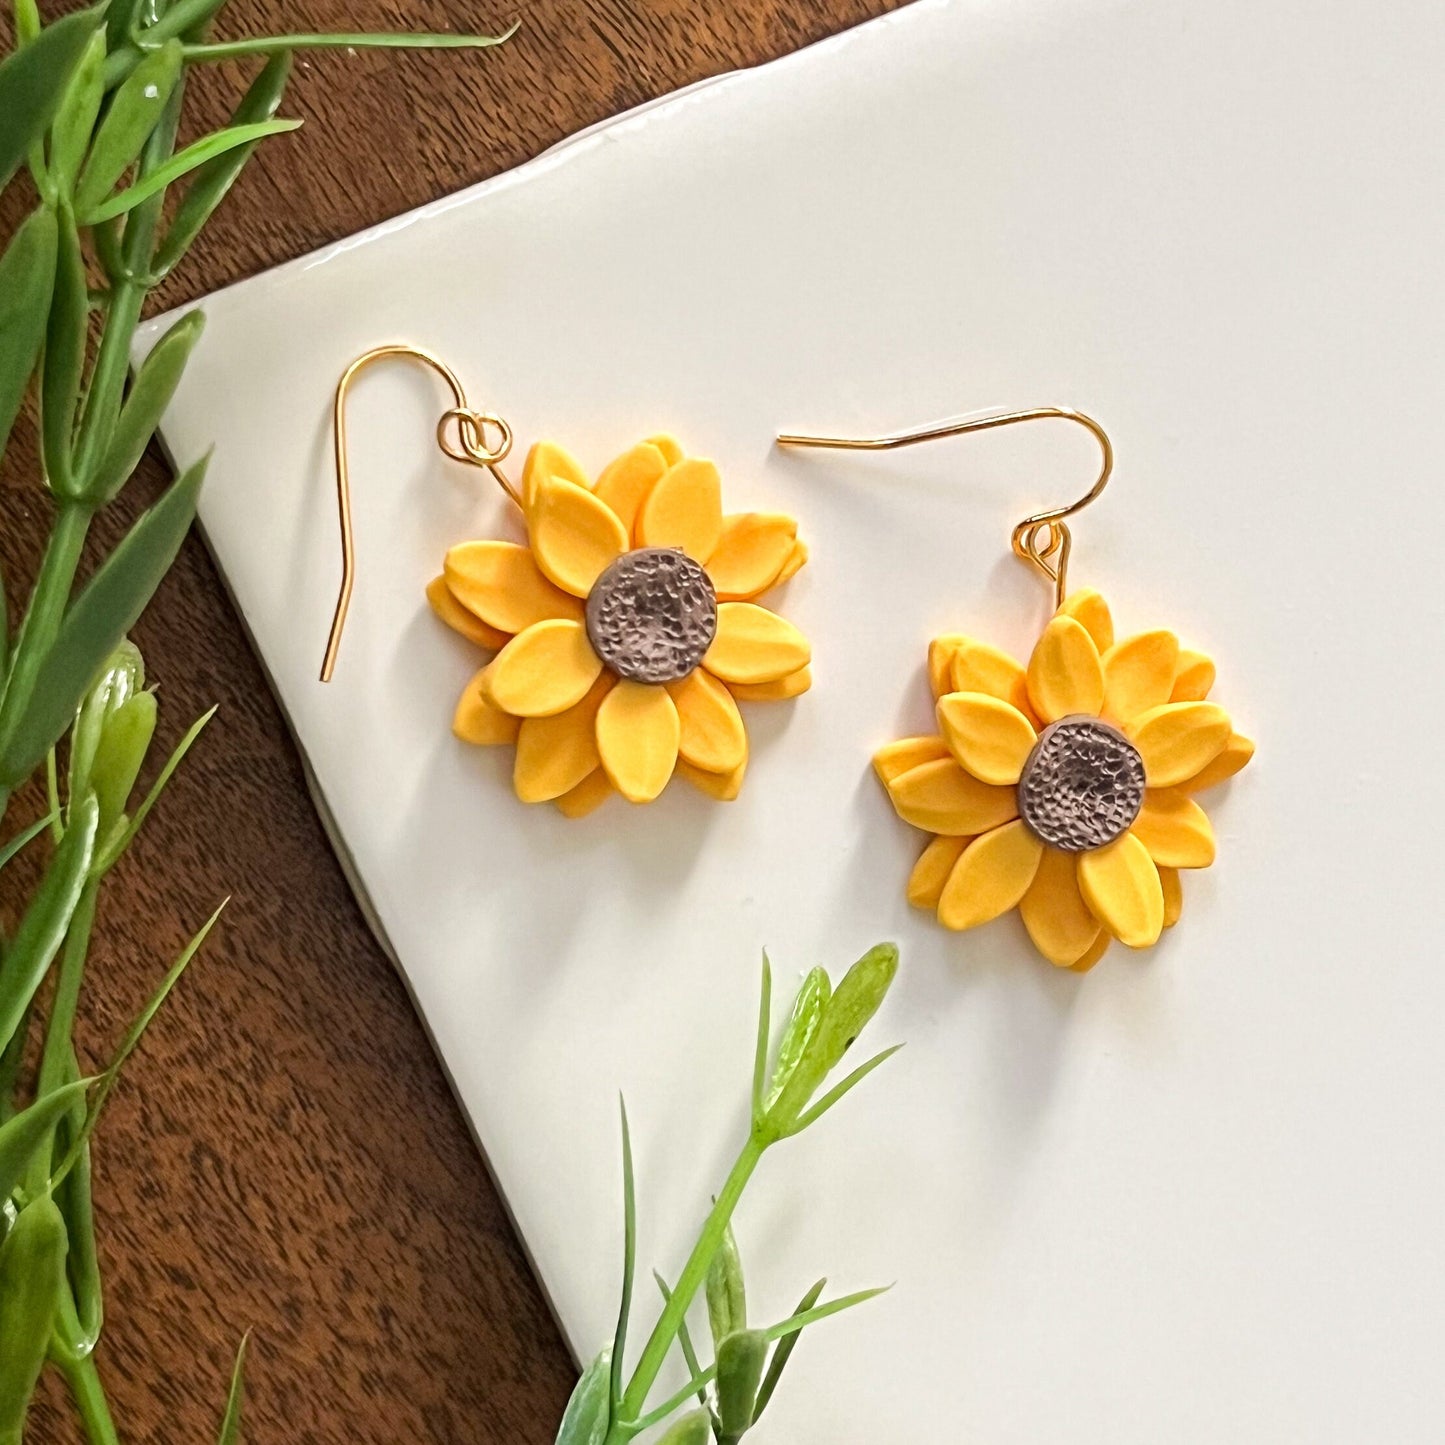 Whole sunflower earrings | 18k gold plated